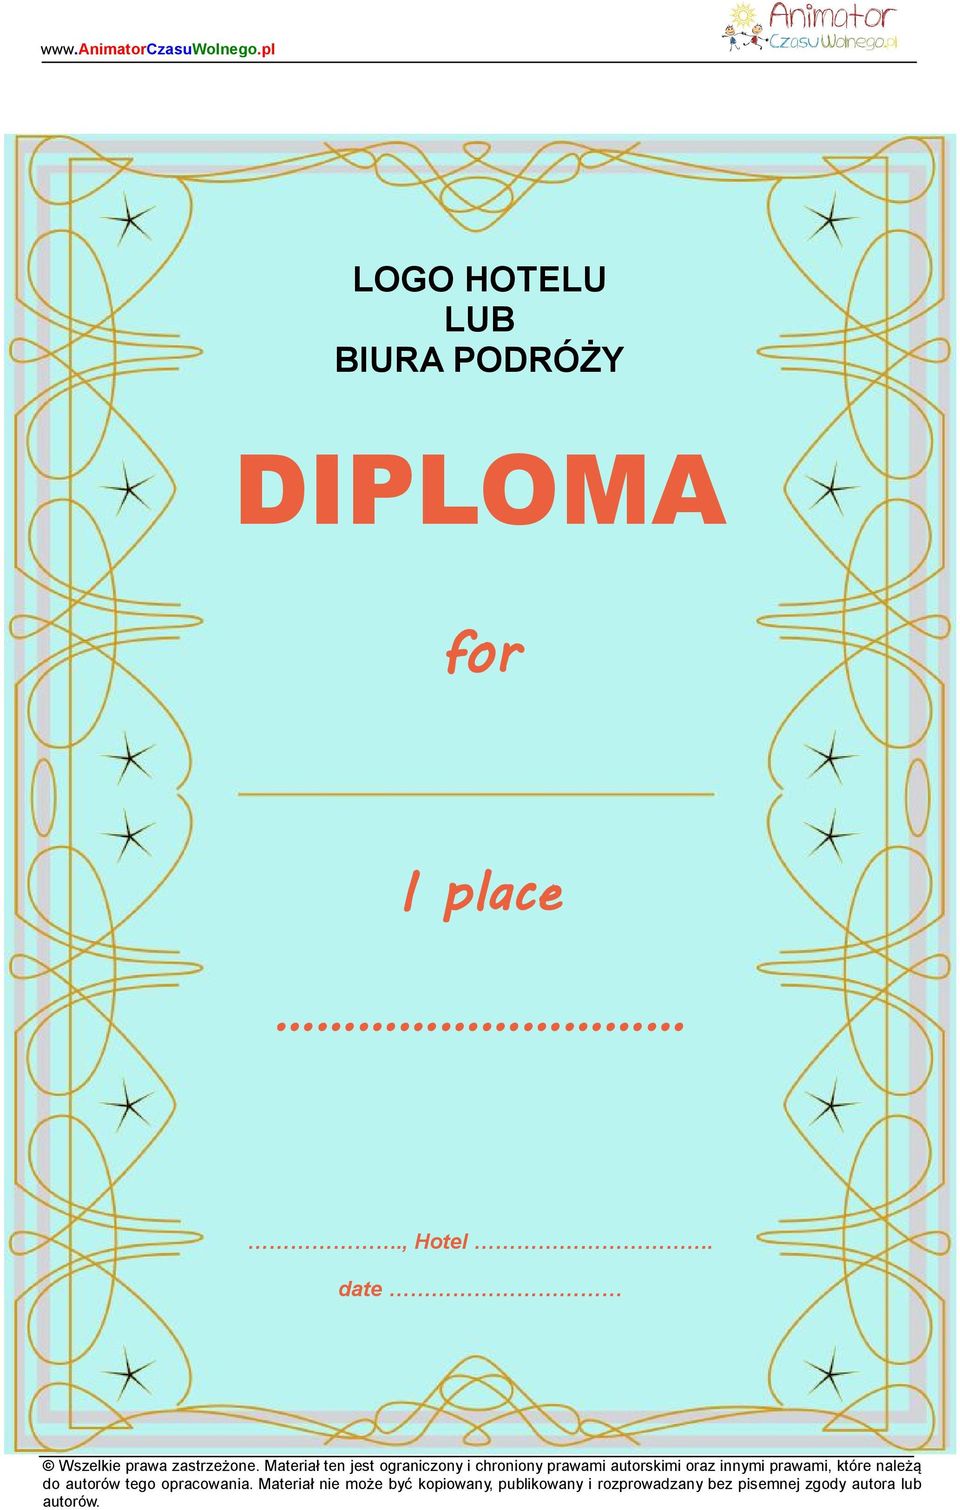 DIPLOMA for I